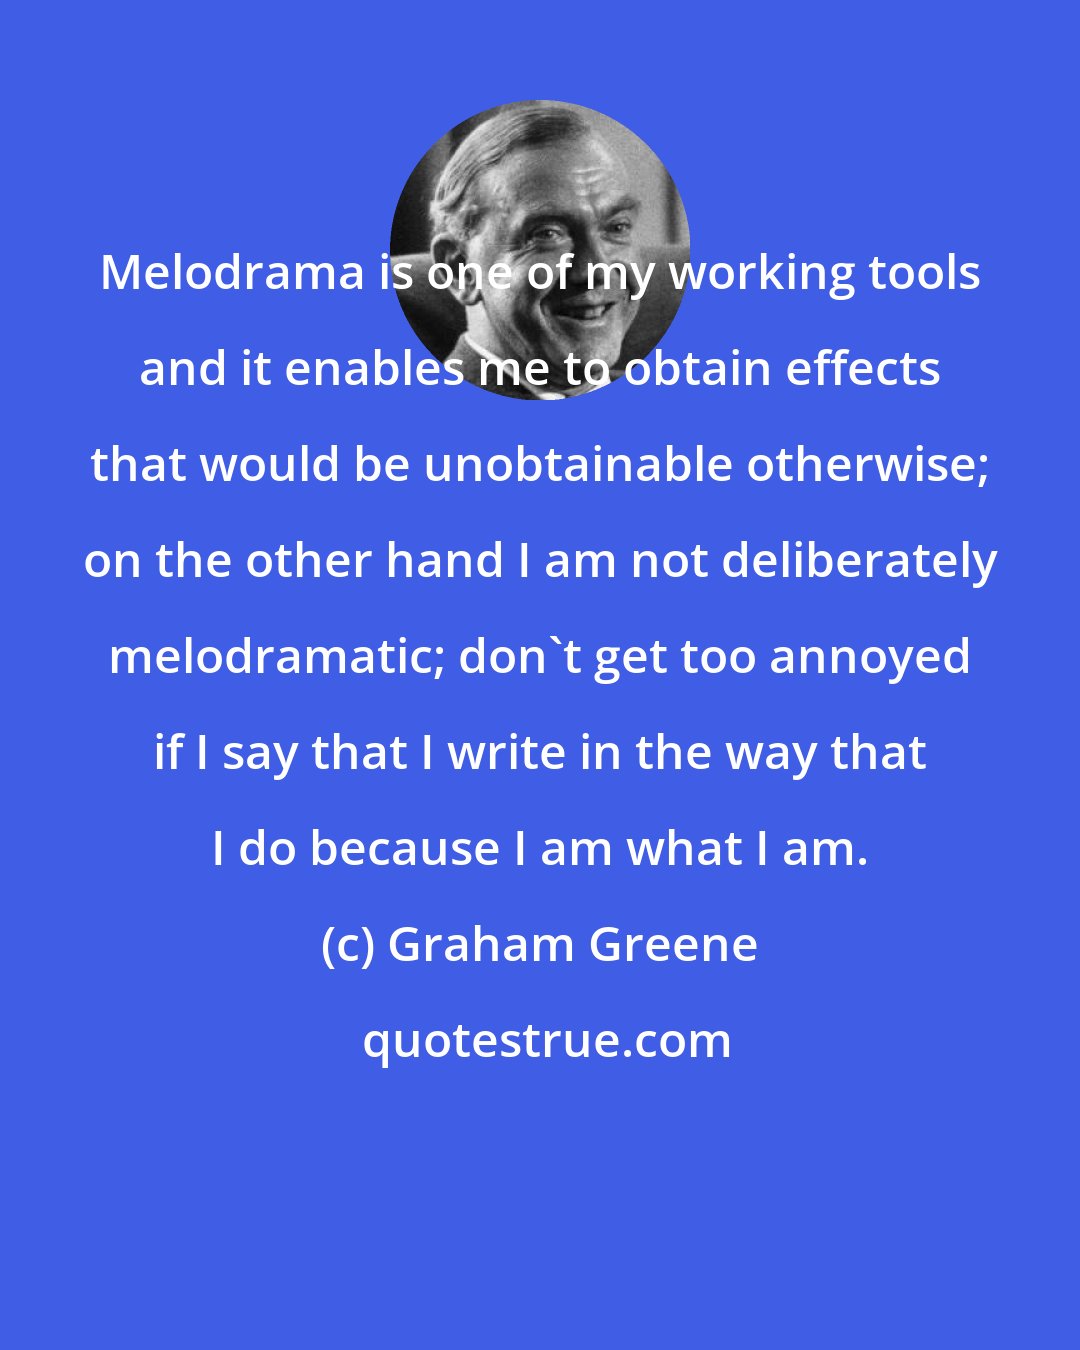 Graham Greene: Melodrama is one of my working tools and it enables me to obtain effects that would be unobtainable otherwise; on the other hand I am not deliberately melodramatic; don't get too annoyed if I say that I write in the way that I do because I am what I am.